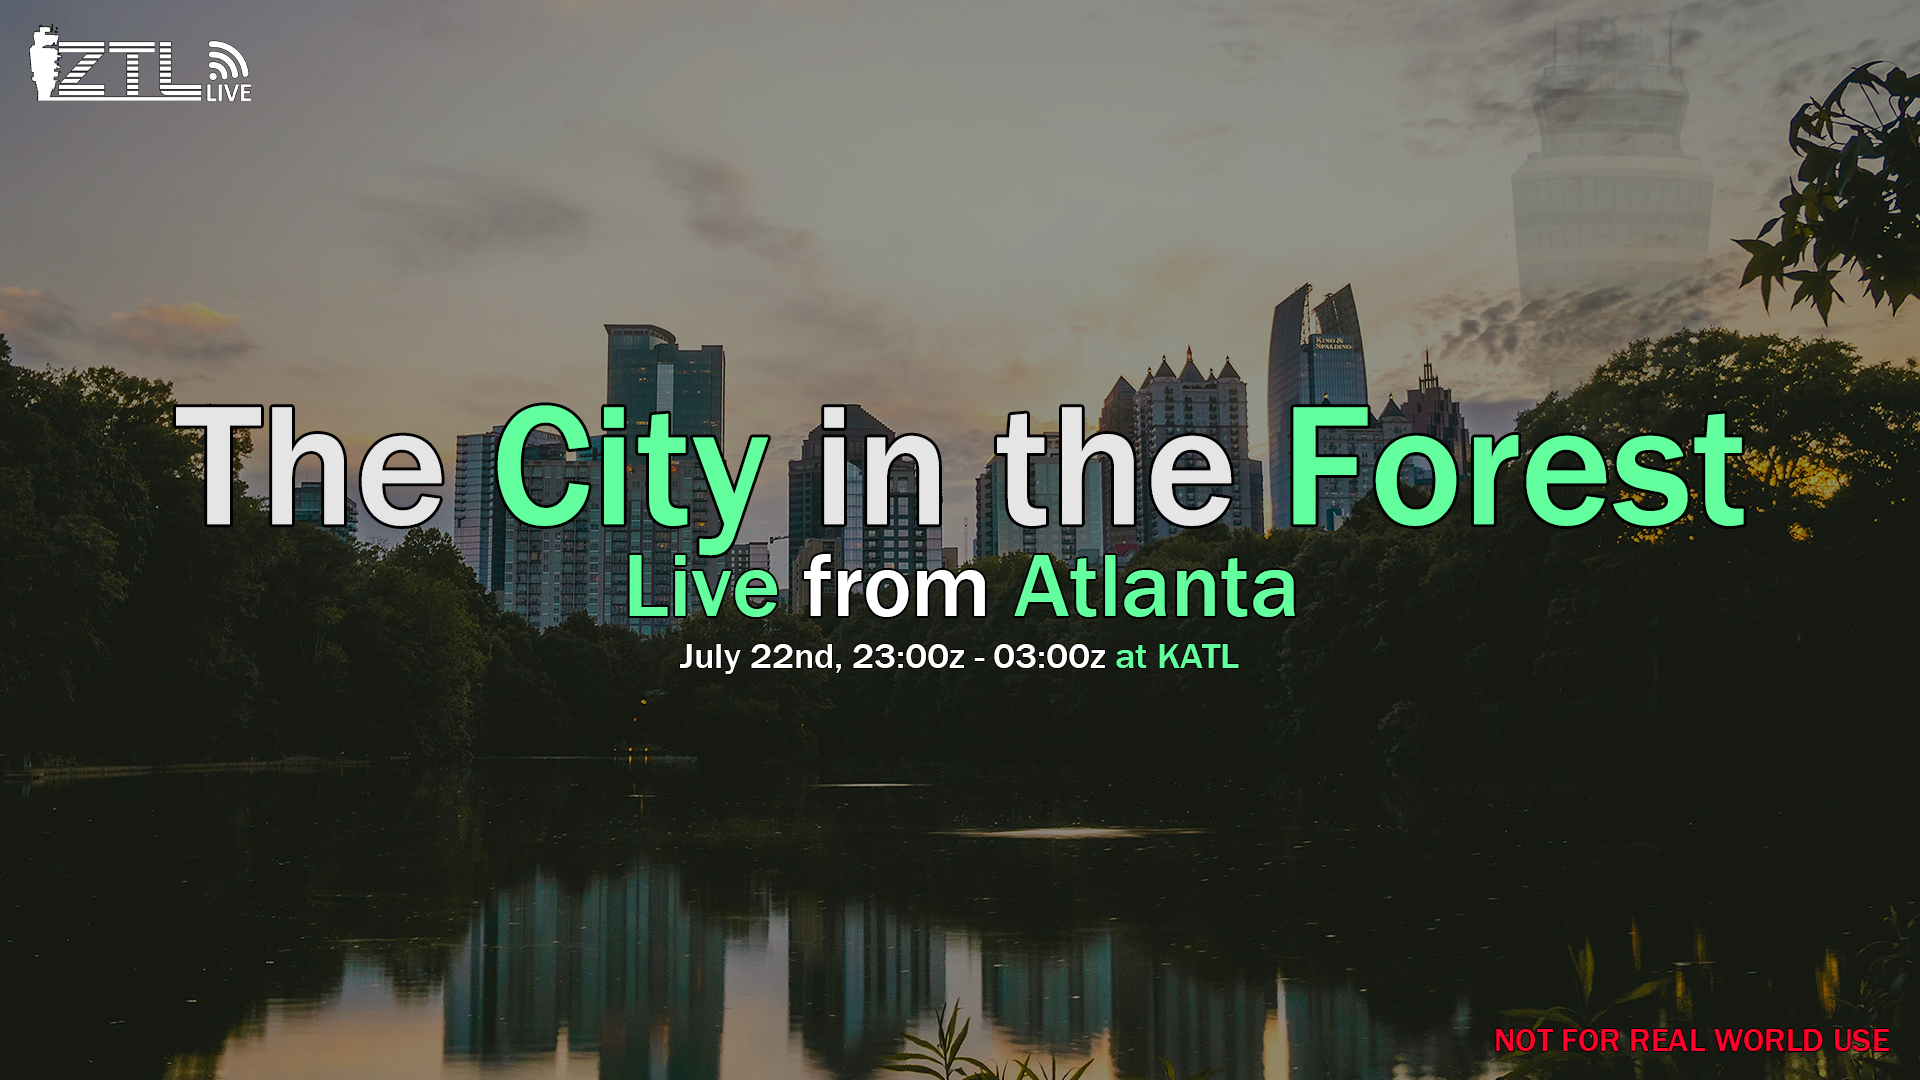 The City in the Forest + Atlanta Live